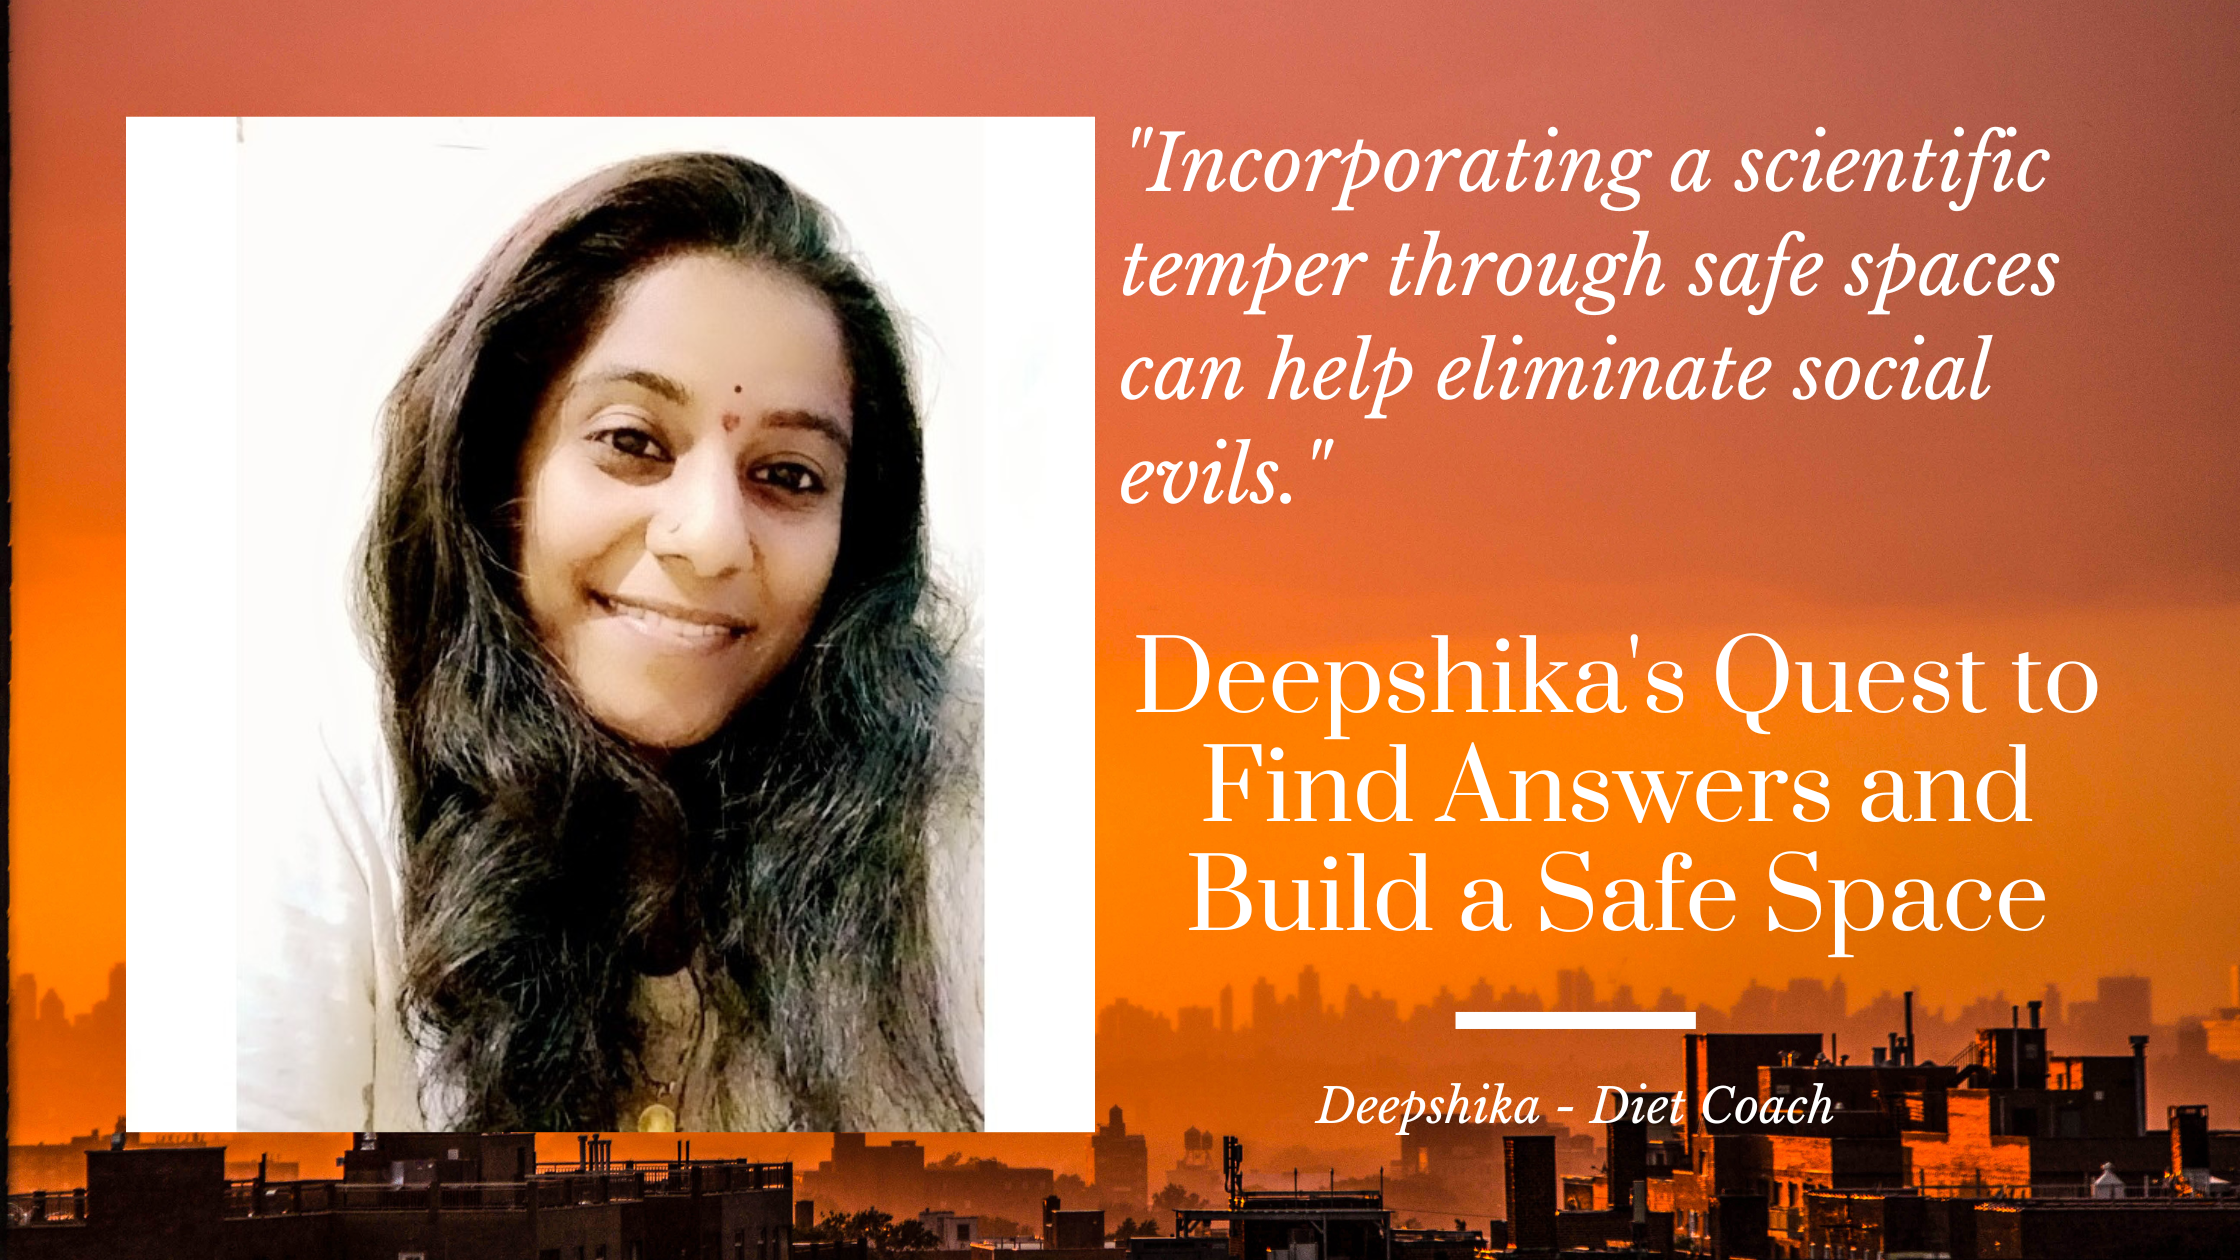 Deepshika’s Quest to Find Answers and Build a Safe Space